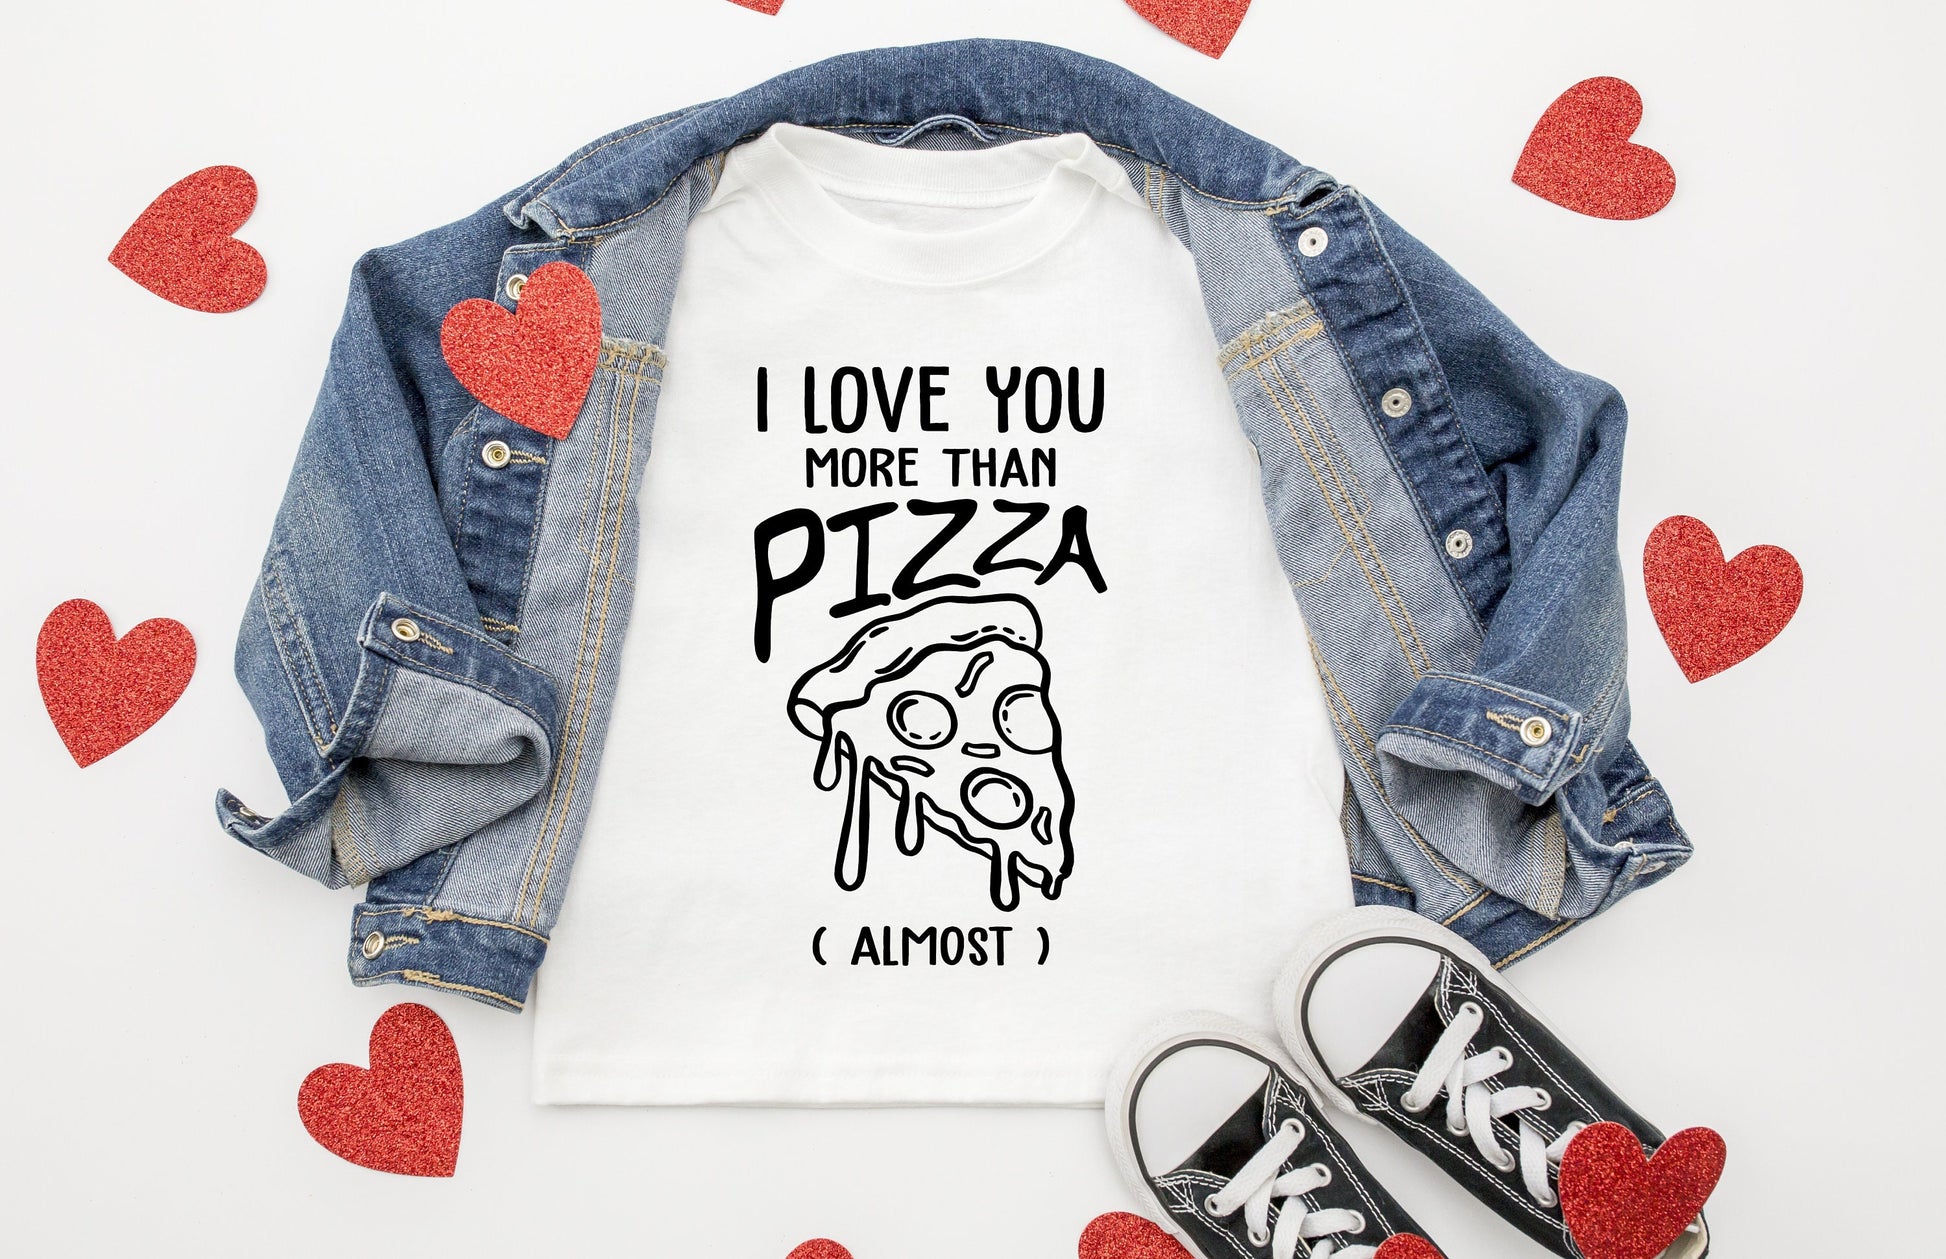 I Love You More Than Pizza (almost) Shirt - Cute Kids Shirt - toddler boy shirt - valentines day shirt - pizza lover shirt